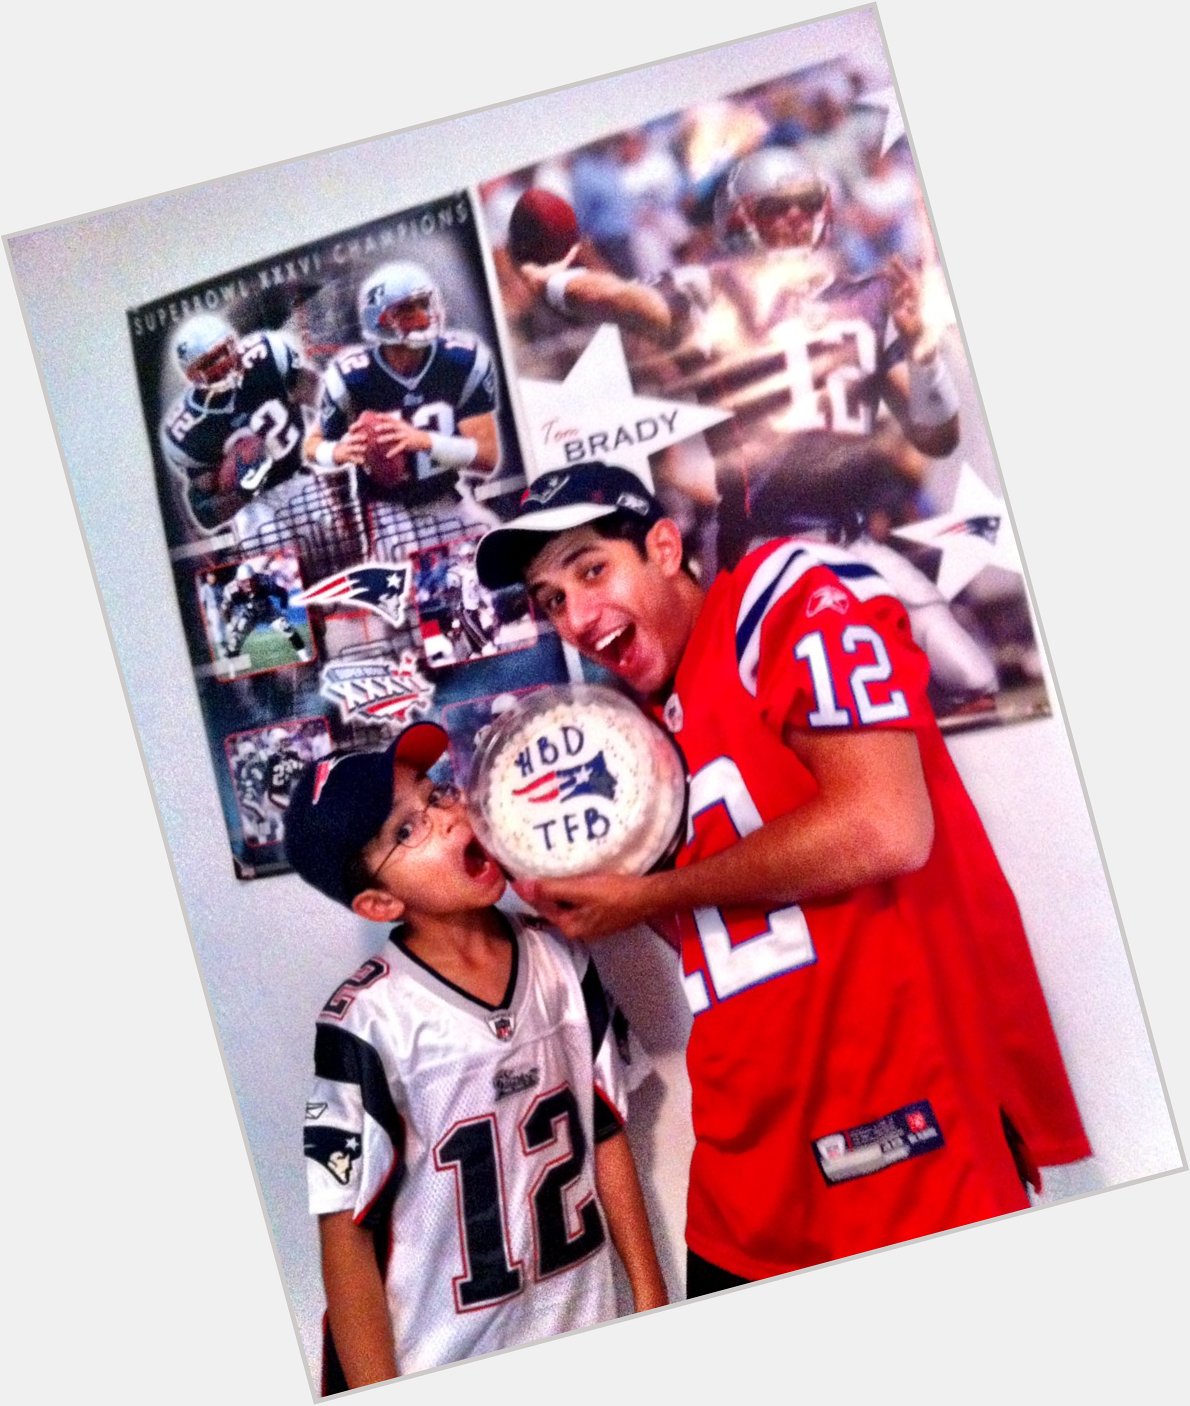 Tom brady s birthday was a huge deal in my household growing up. miss you happy birthday! 